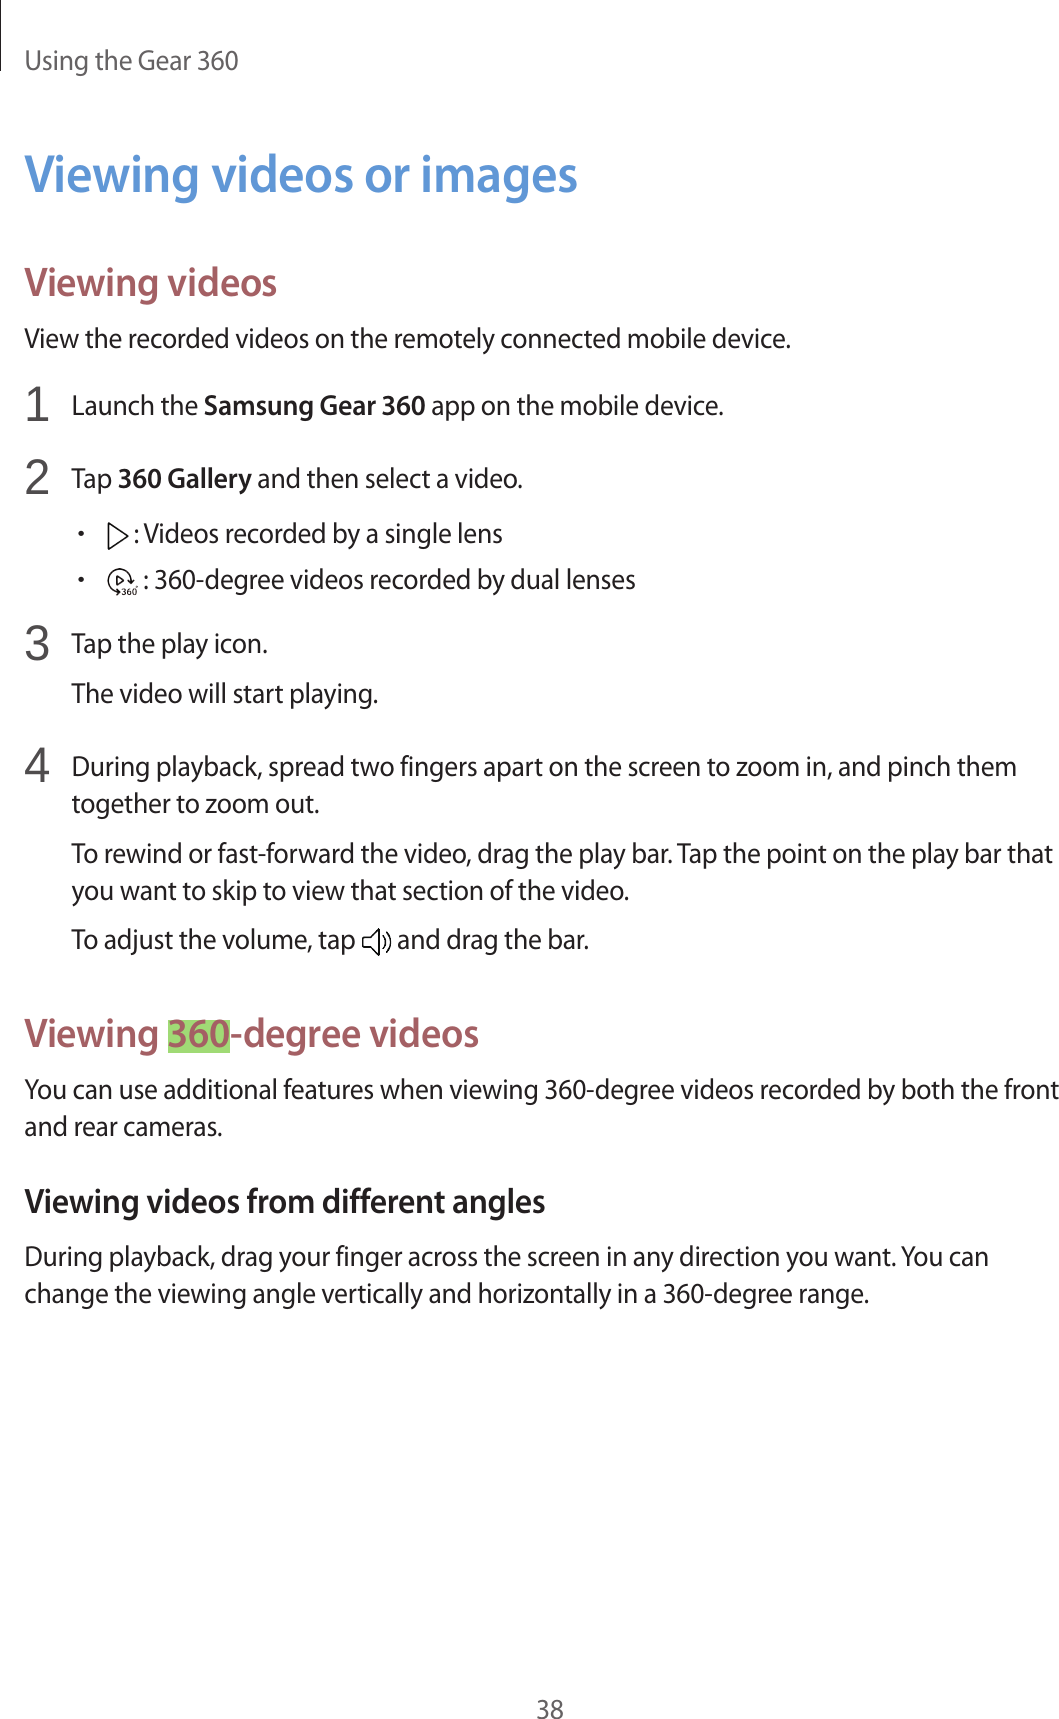 Using the Gear 36038Viewing videos or imagesViewing videosView the recorded videos on the remotely connected mobile device.1  Launch the Samsung Gear 360 app on the mobile device.2  Tap 360 Gallery and then select a video.• : Videos recorded by a single lens• : 360-degree videos recorded by dual lenses3  Tap the play icon.The video will start playing.4  During playback, spread two fingers apart on the screen to zoom in, and pinch them together to zoom out.To rewind or fast-forward the video, drag the play bar. Tap the point on the play bar that you want to skip to view that section of the video.To adjust the volume, tap   and drag the bar.Viewing 360-degree videosYou can use additional features when viewing 360-degree videos recorded by both the front and rear cameras.Viewing videos from different anglesDuring playback, drag your finger across the screen in any direction you want. You can change the viewing angle vertically and horizontally in a 360-degree range.